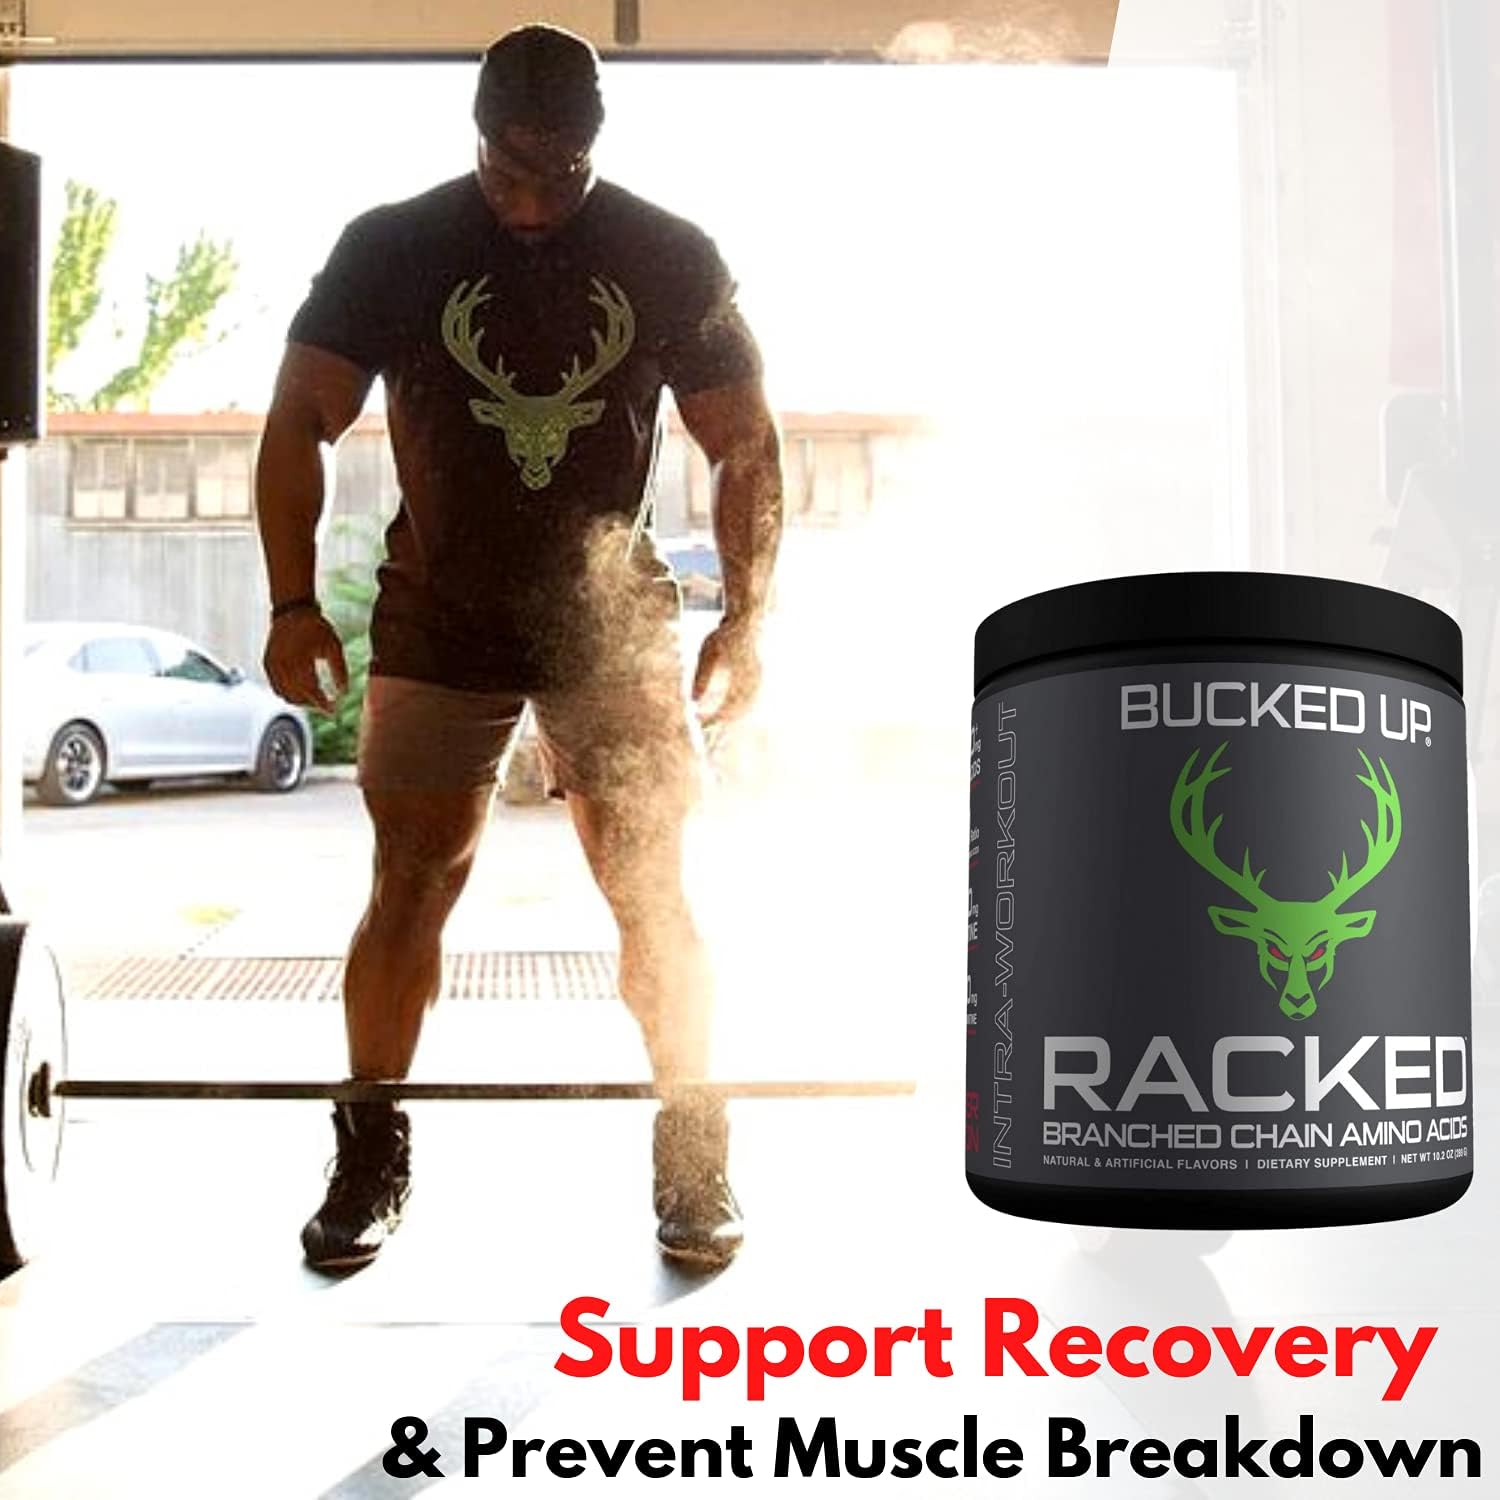 Bucked Up- BCAA RACKED™ Branch Chained Amino Acids | L-Carnitine, Acetyl L-Carnitine, GBB | Post Workout Recovery, Protein Synthesis, Lean Muscle BCAAs That You Can Feel! 30 Servings (Watermelon) : Health & Household